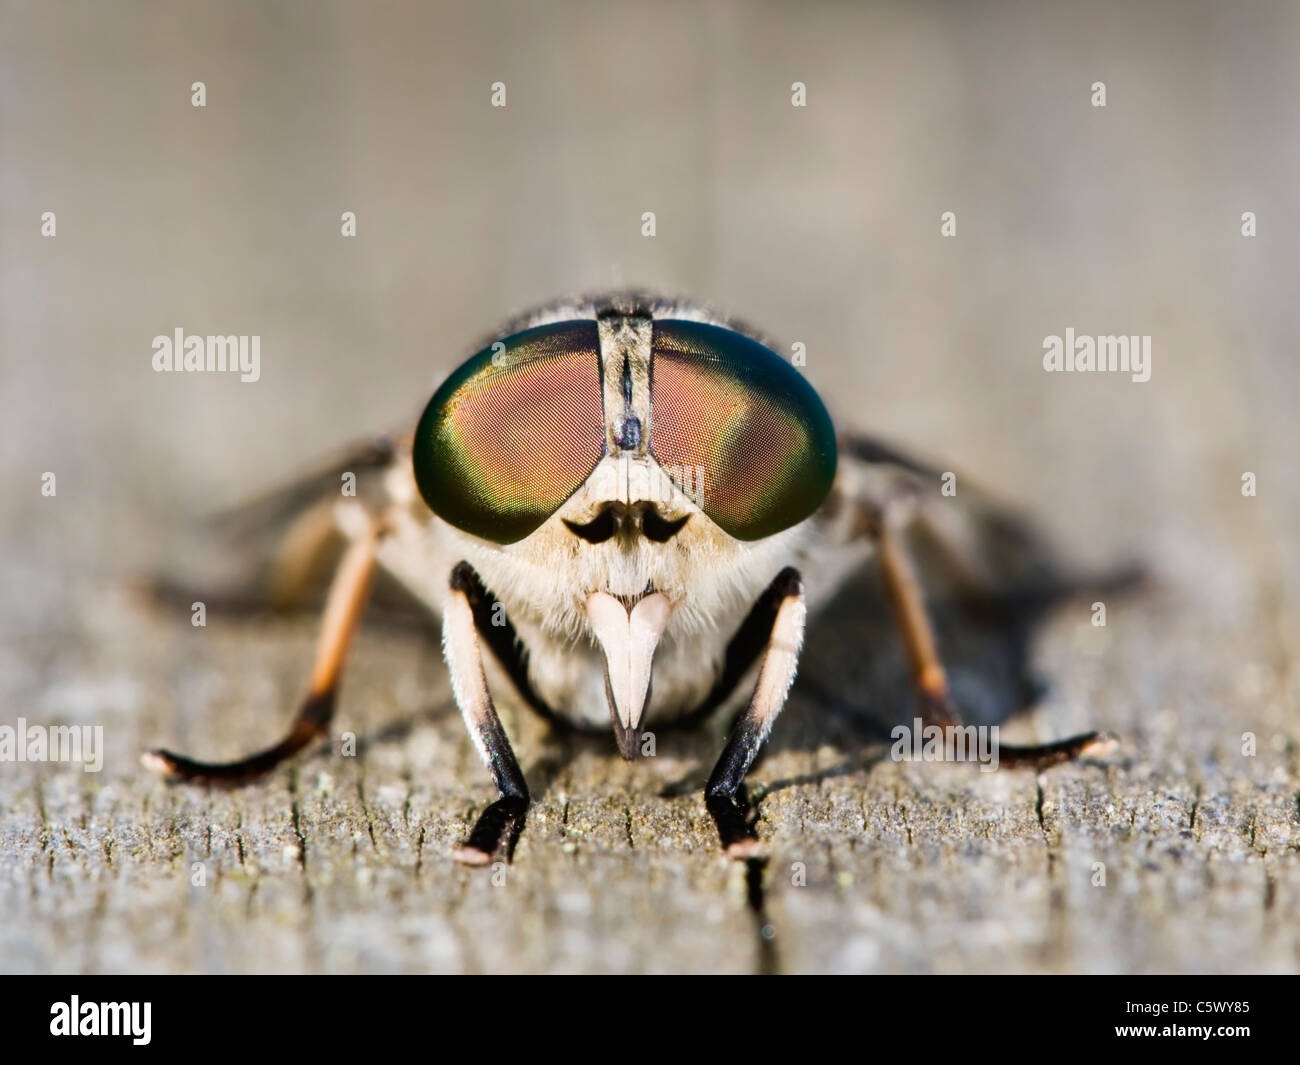 Horse fly resting on wooden fence Stock Photo